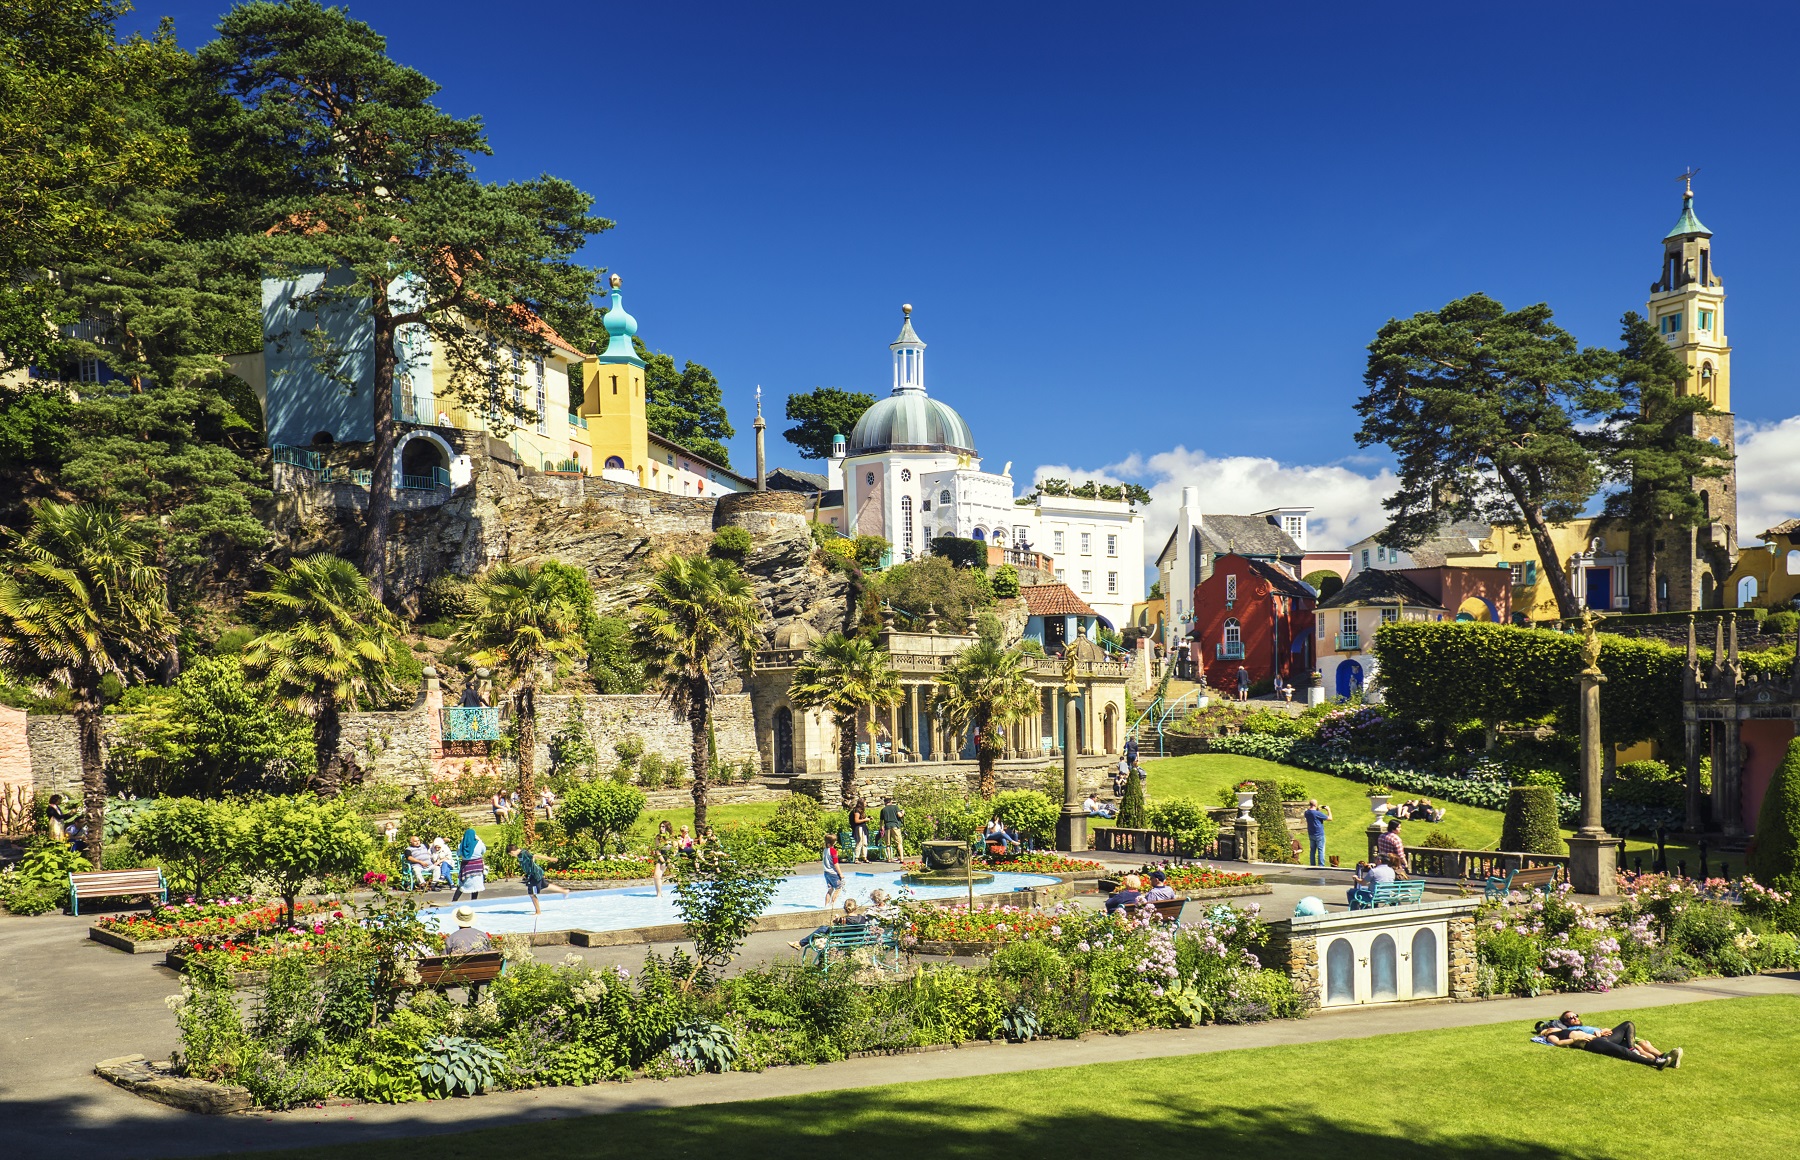 Portmeirion | North Wales | Acorn Leisure Holiday Parks